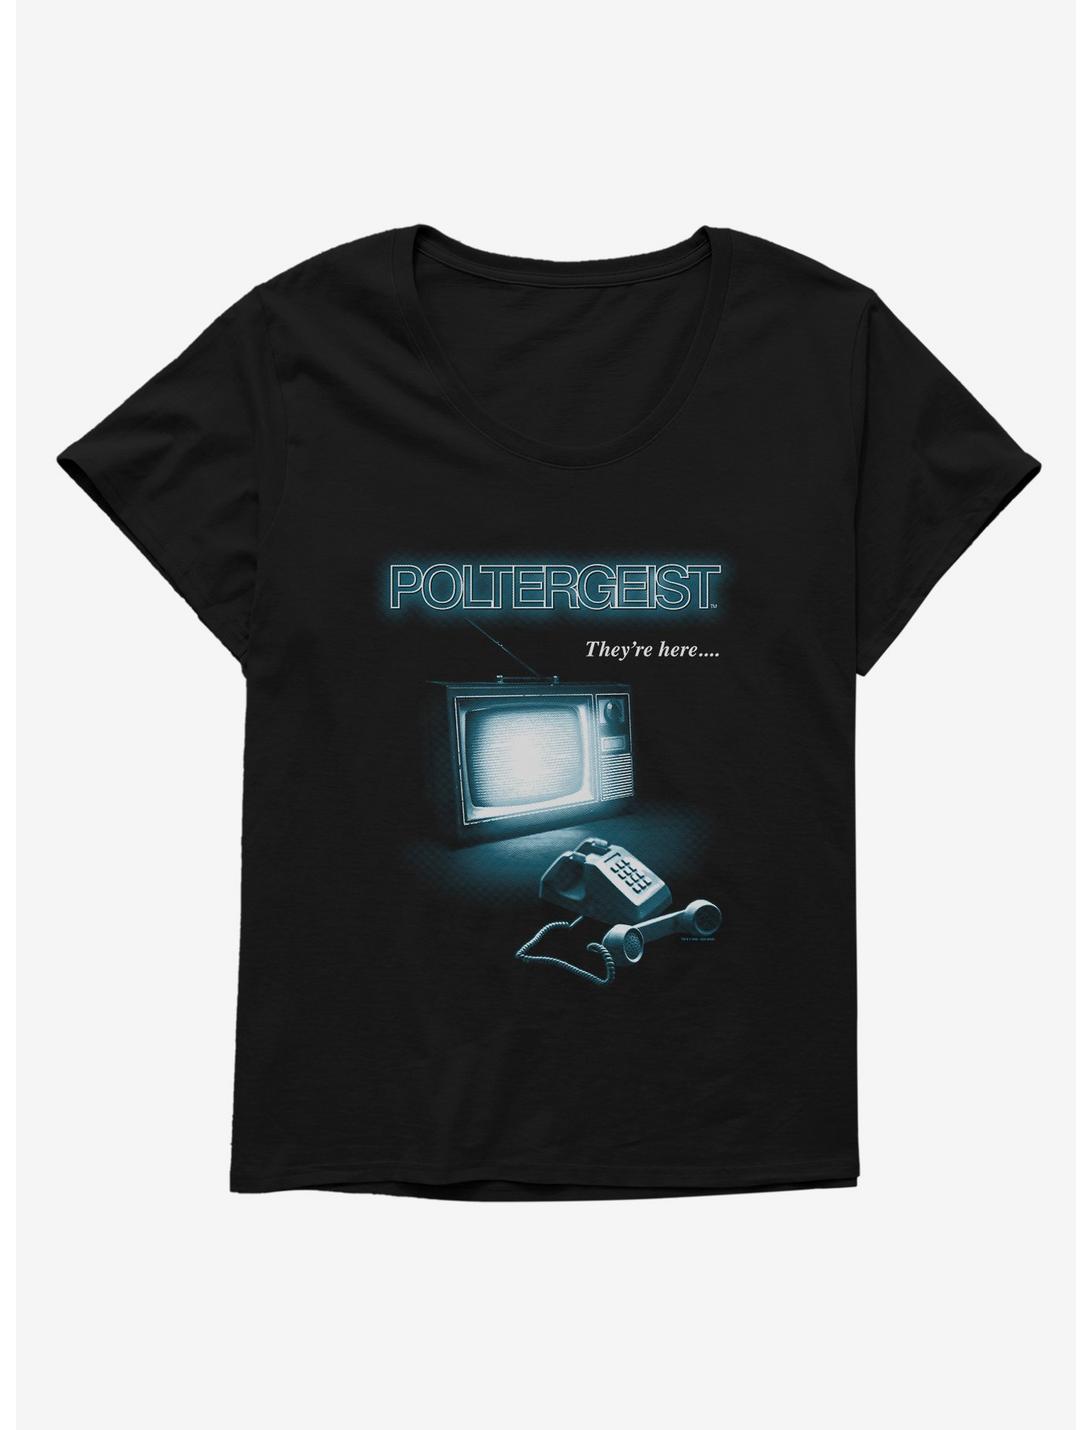 Poltergeist They're Here? Womens T-Shirt Plus Size, BLACK, hi-res